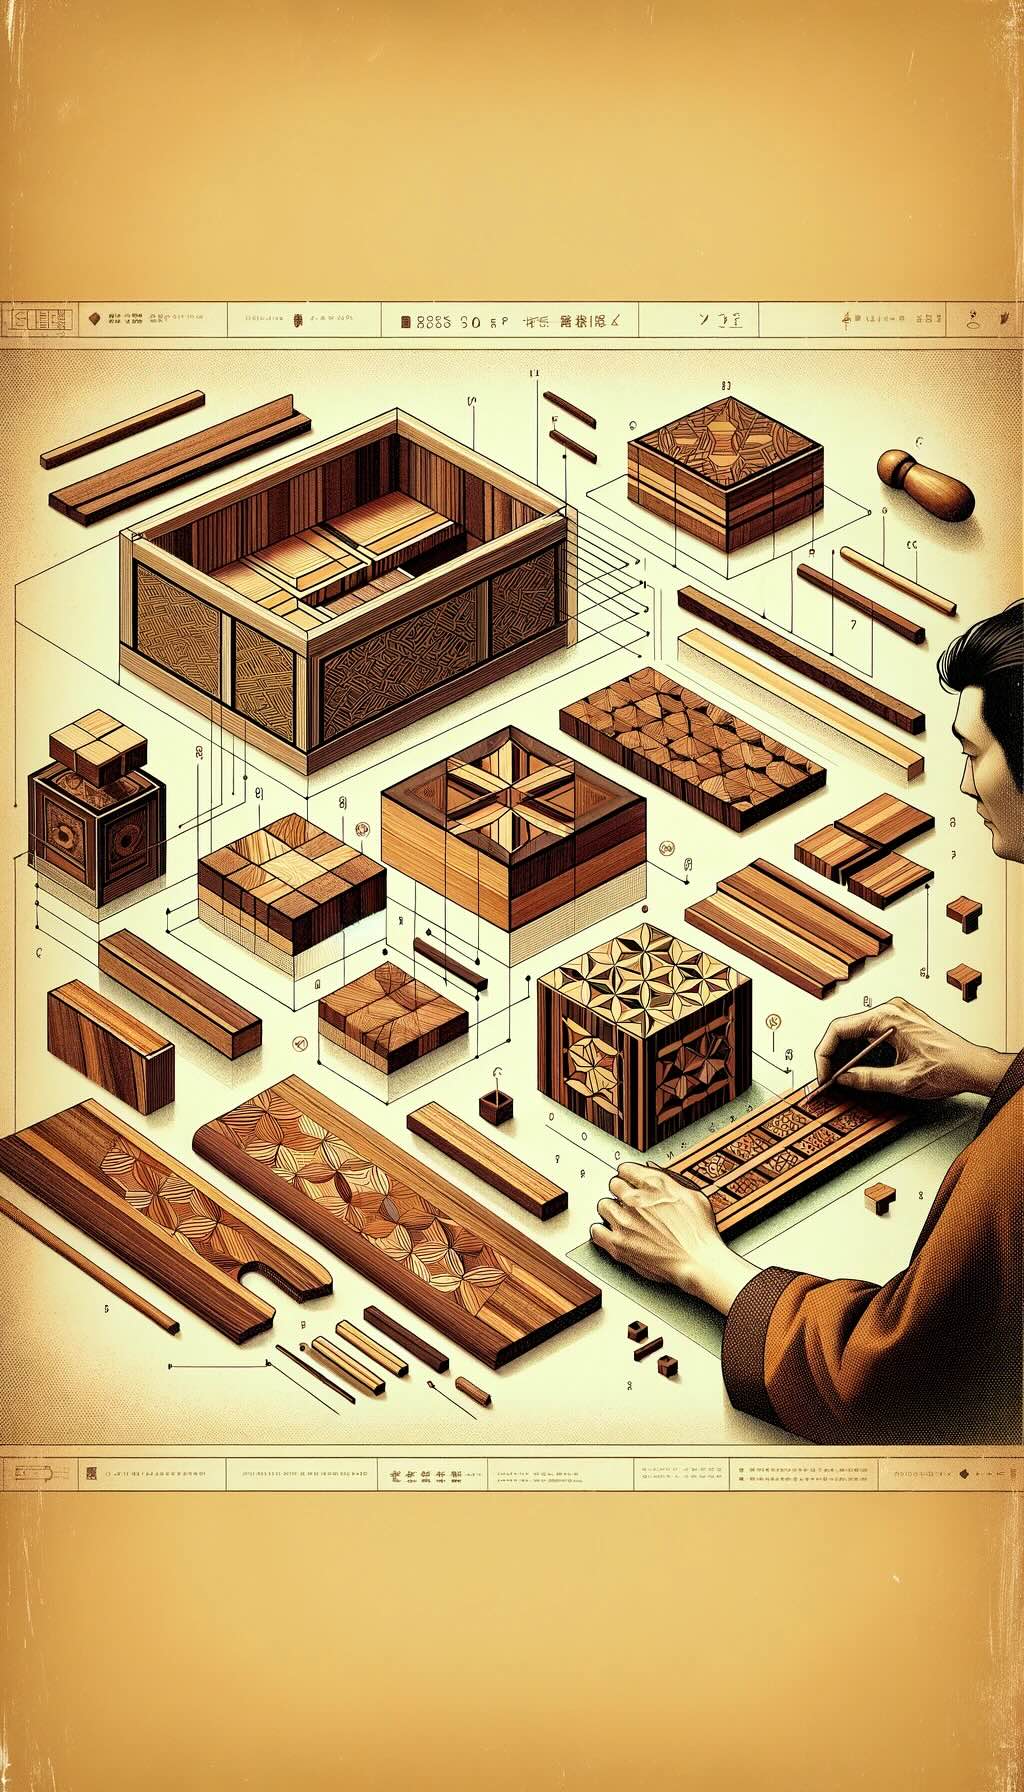 Basics of Yosegi-zaiku, the traditional Japanese art of decorative woodworking, in a retro fade digital art style. It depicts a craftsman carefully assembling different types of wood to create elaborate patterns, highlighting the geometric designs and the natural beauty of the wood grains features a 'Himitsu-bako' (secret box) adorned with Yosegi-zaiku veneers, capturing the essence of this intricate craft and the harmony and aesthetic appeal of the combined woods.